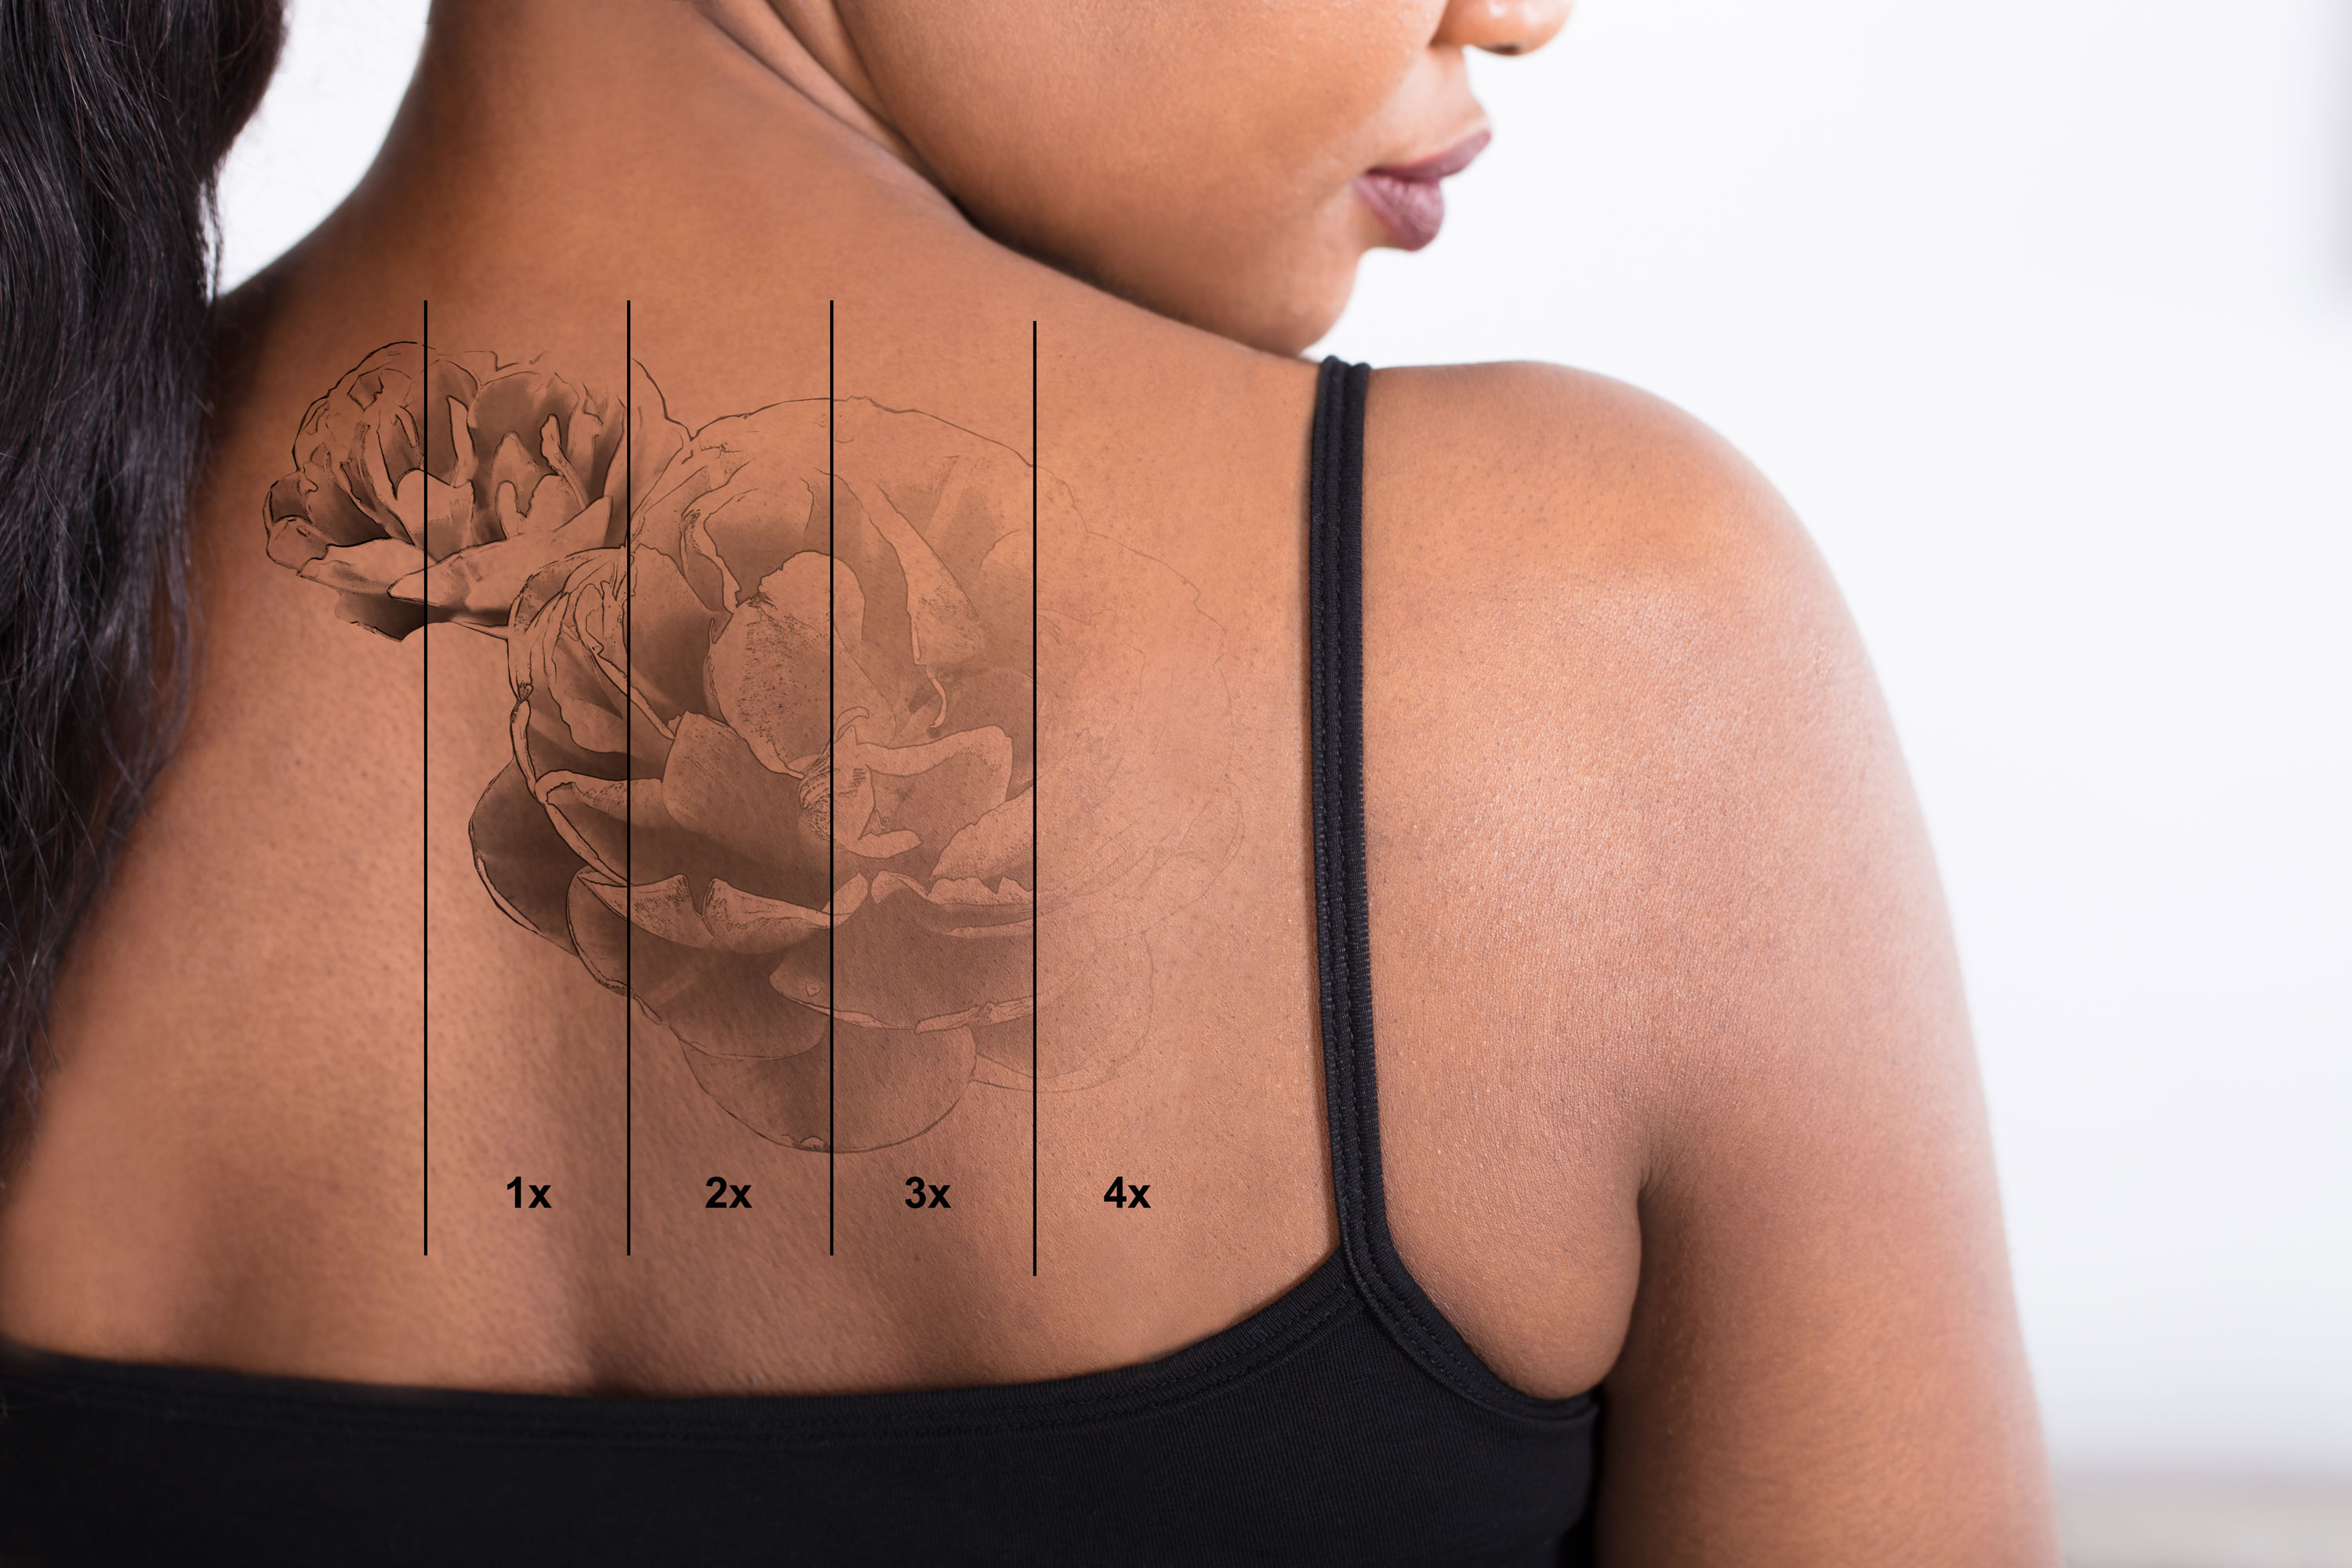 11 Sessions On (Full Back) | Tracking Maia Lee's Laser Tattoo Removal  Journey